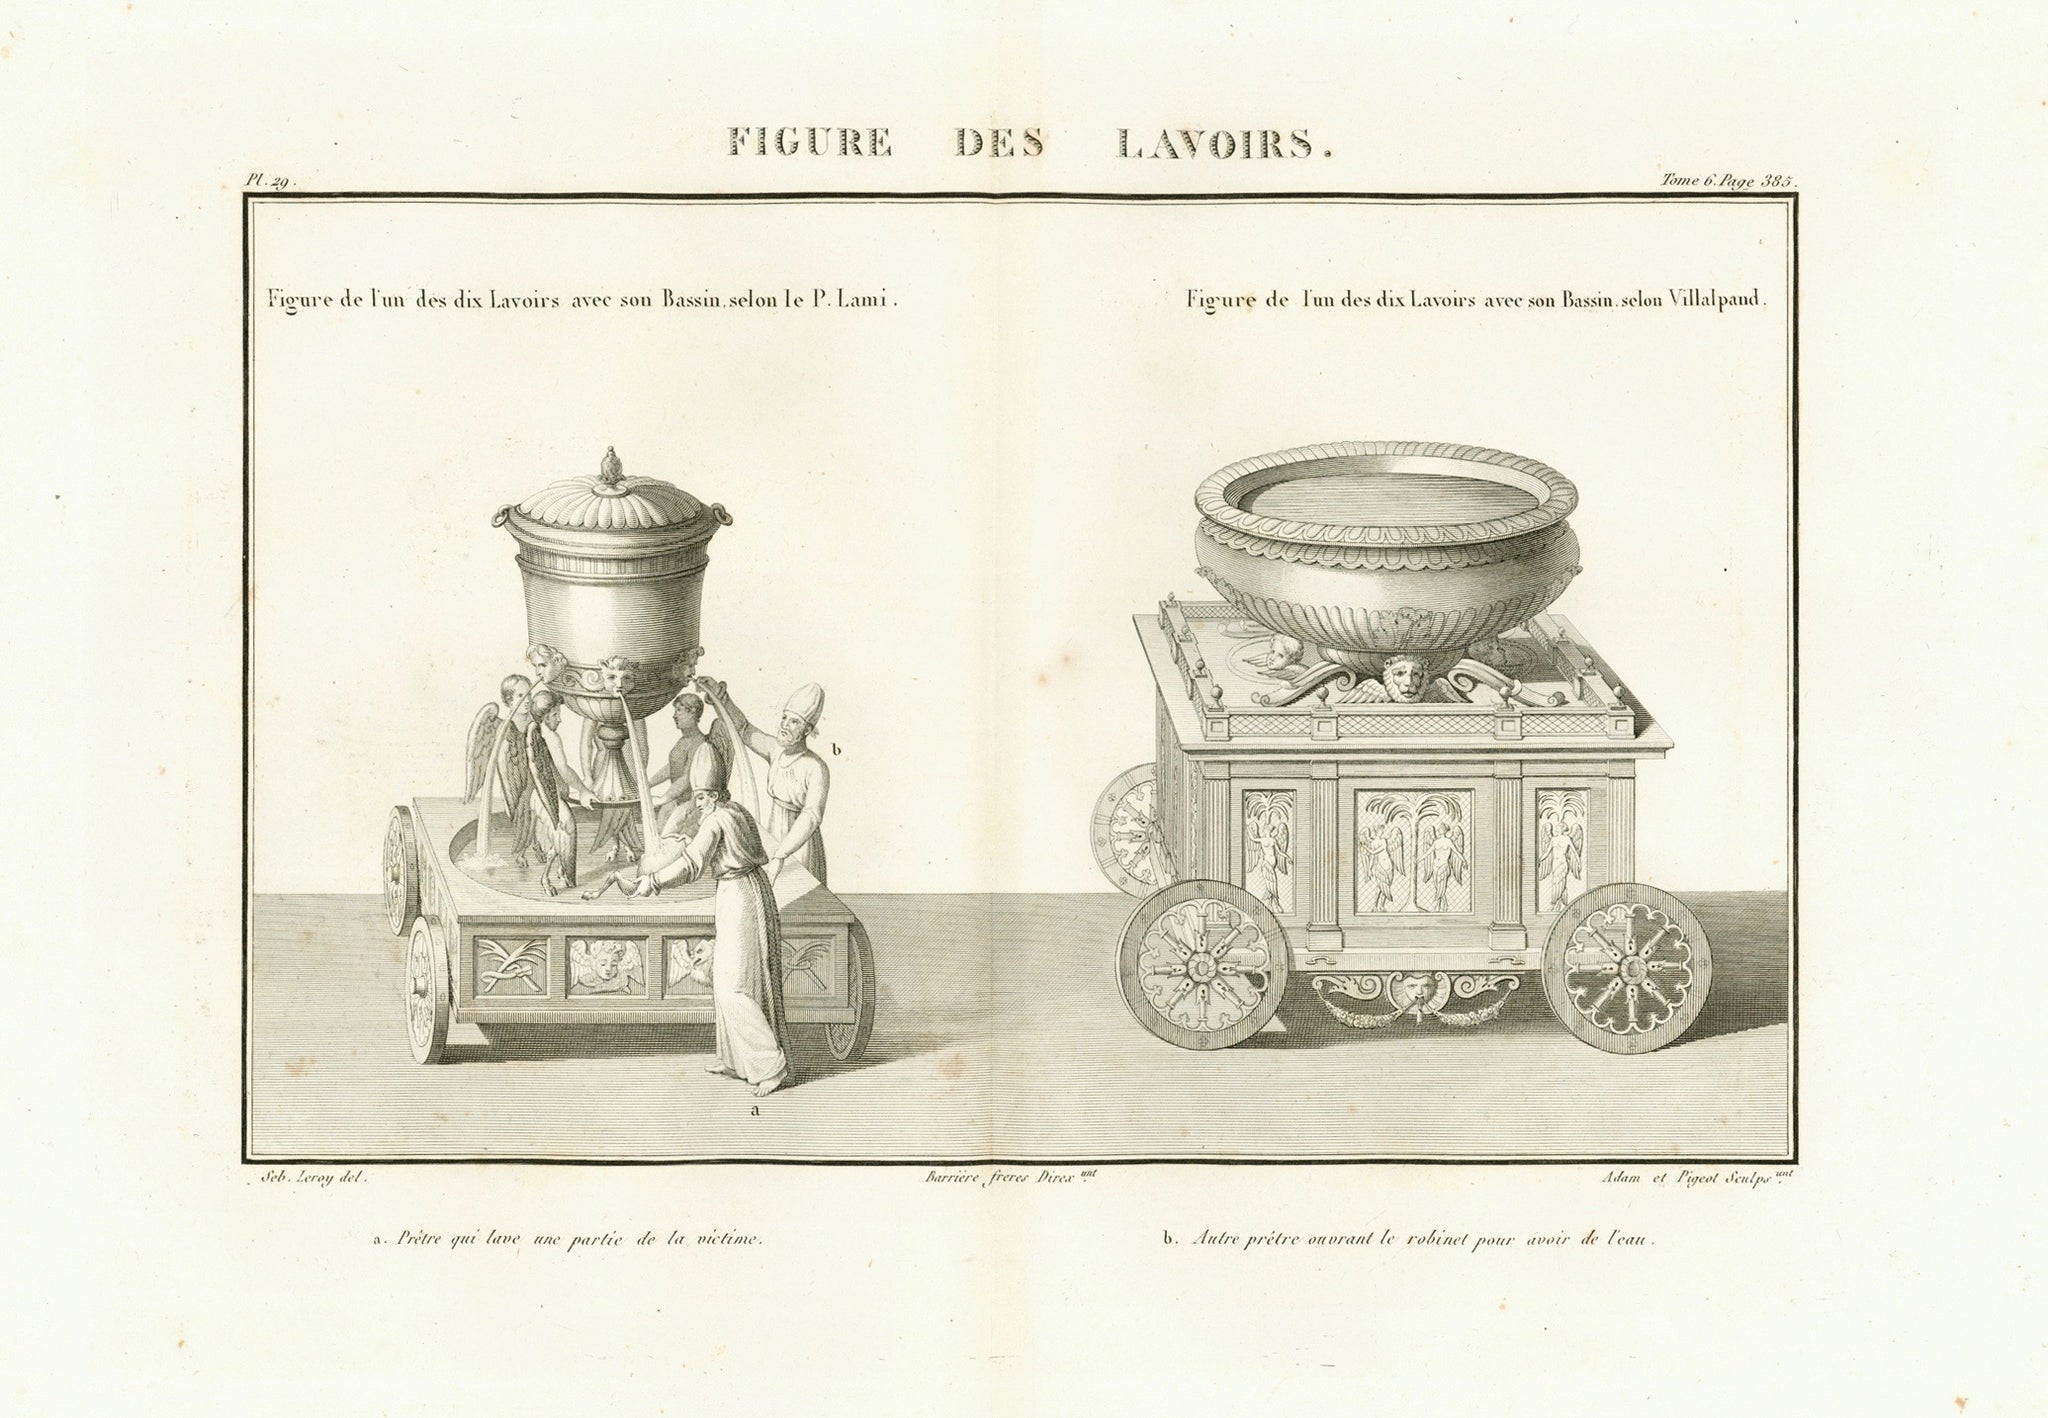 "Figure des Lavoirs"  Mobile Wash Basins (Wash places).  Copper etching by Adam after the drawing by Martin.  Published in "Saint Bible de Vence" by Abbe Henri-Francois de Vence Paris, 1827 Very good condition. Some scattered foxing spots in margins. Vertical centerfold to fit original book size.